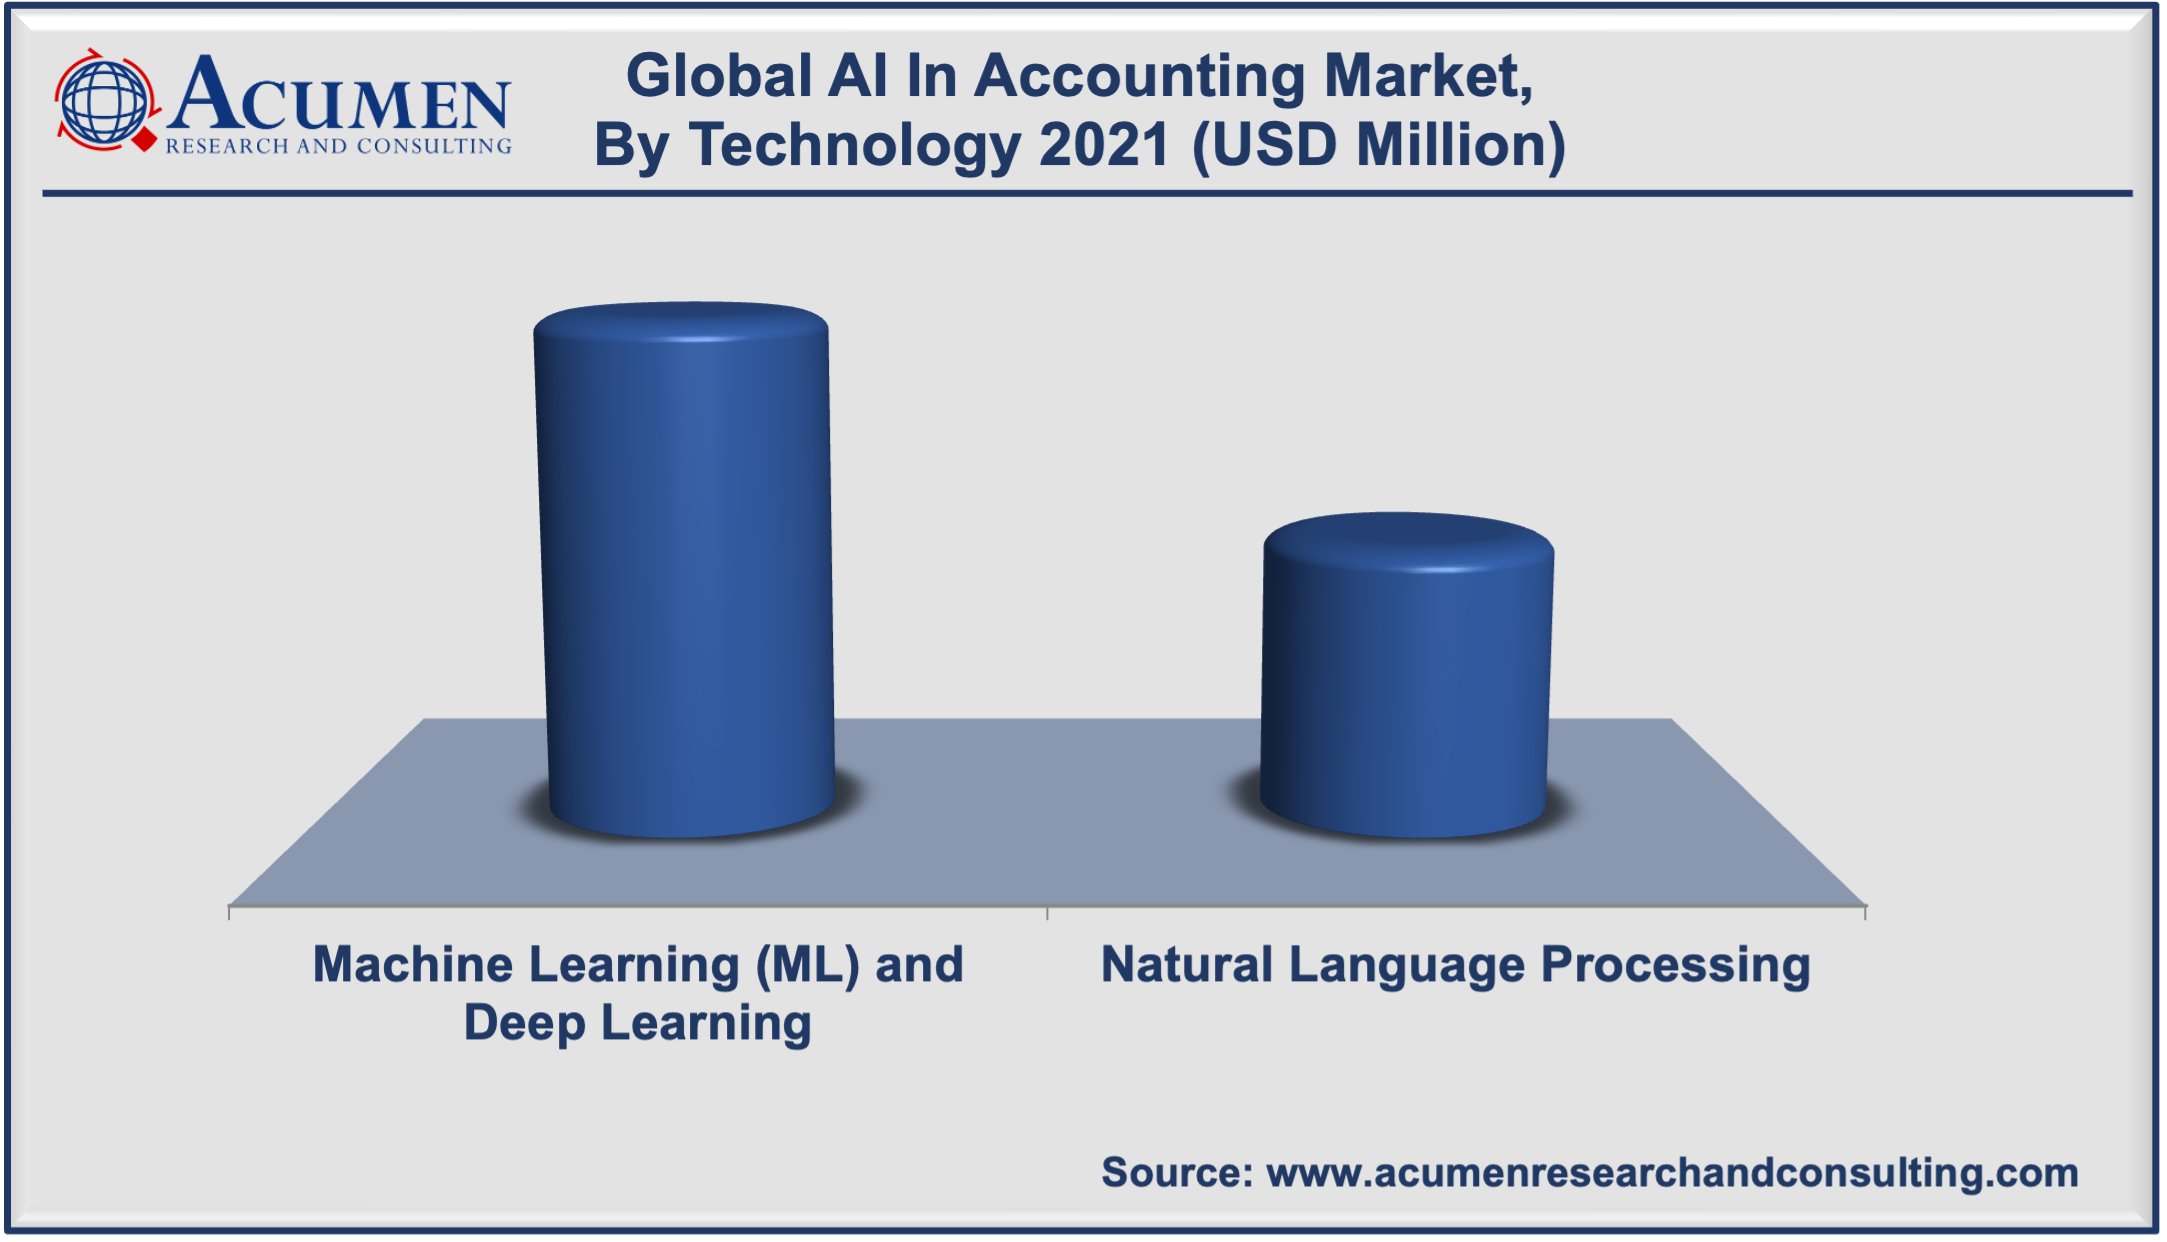 Artificial Intelligence in Accounting Market Share accounted for USD 1,511 Million in 2021 and is estimated to reach USD 53,893 Million by 2030.